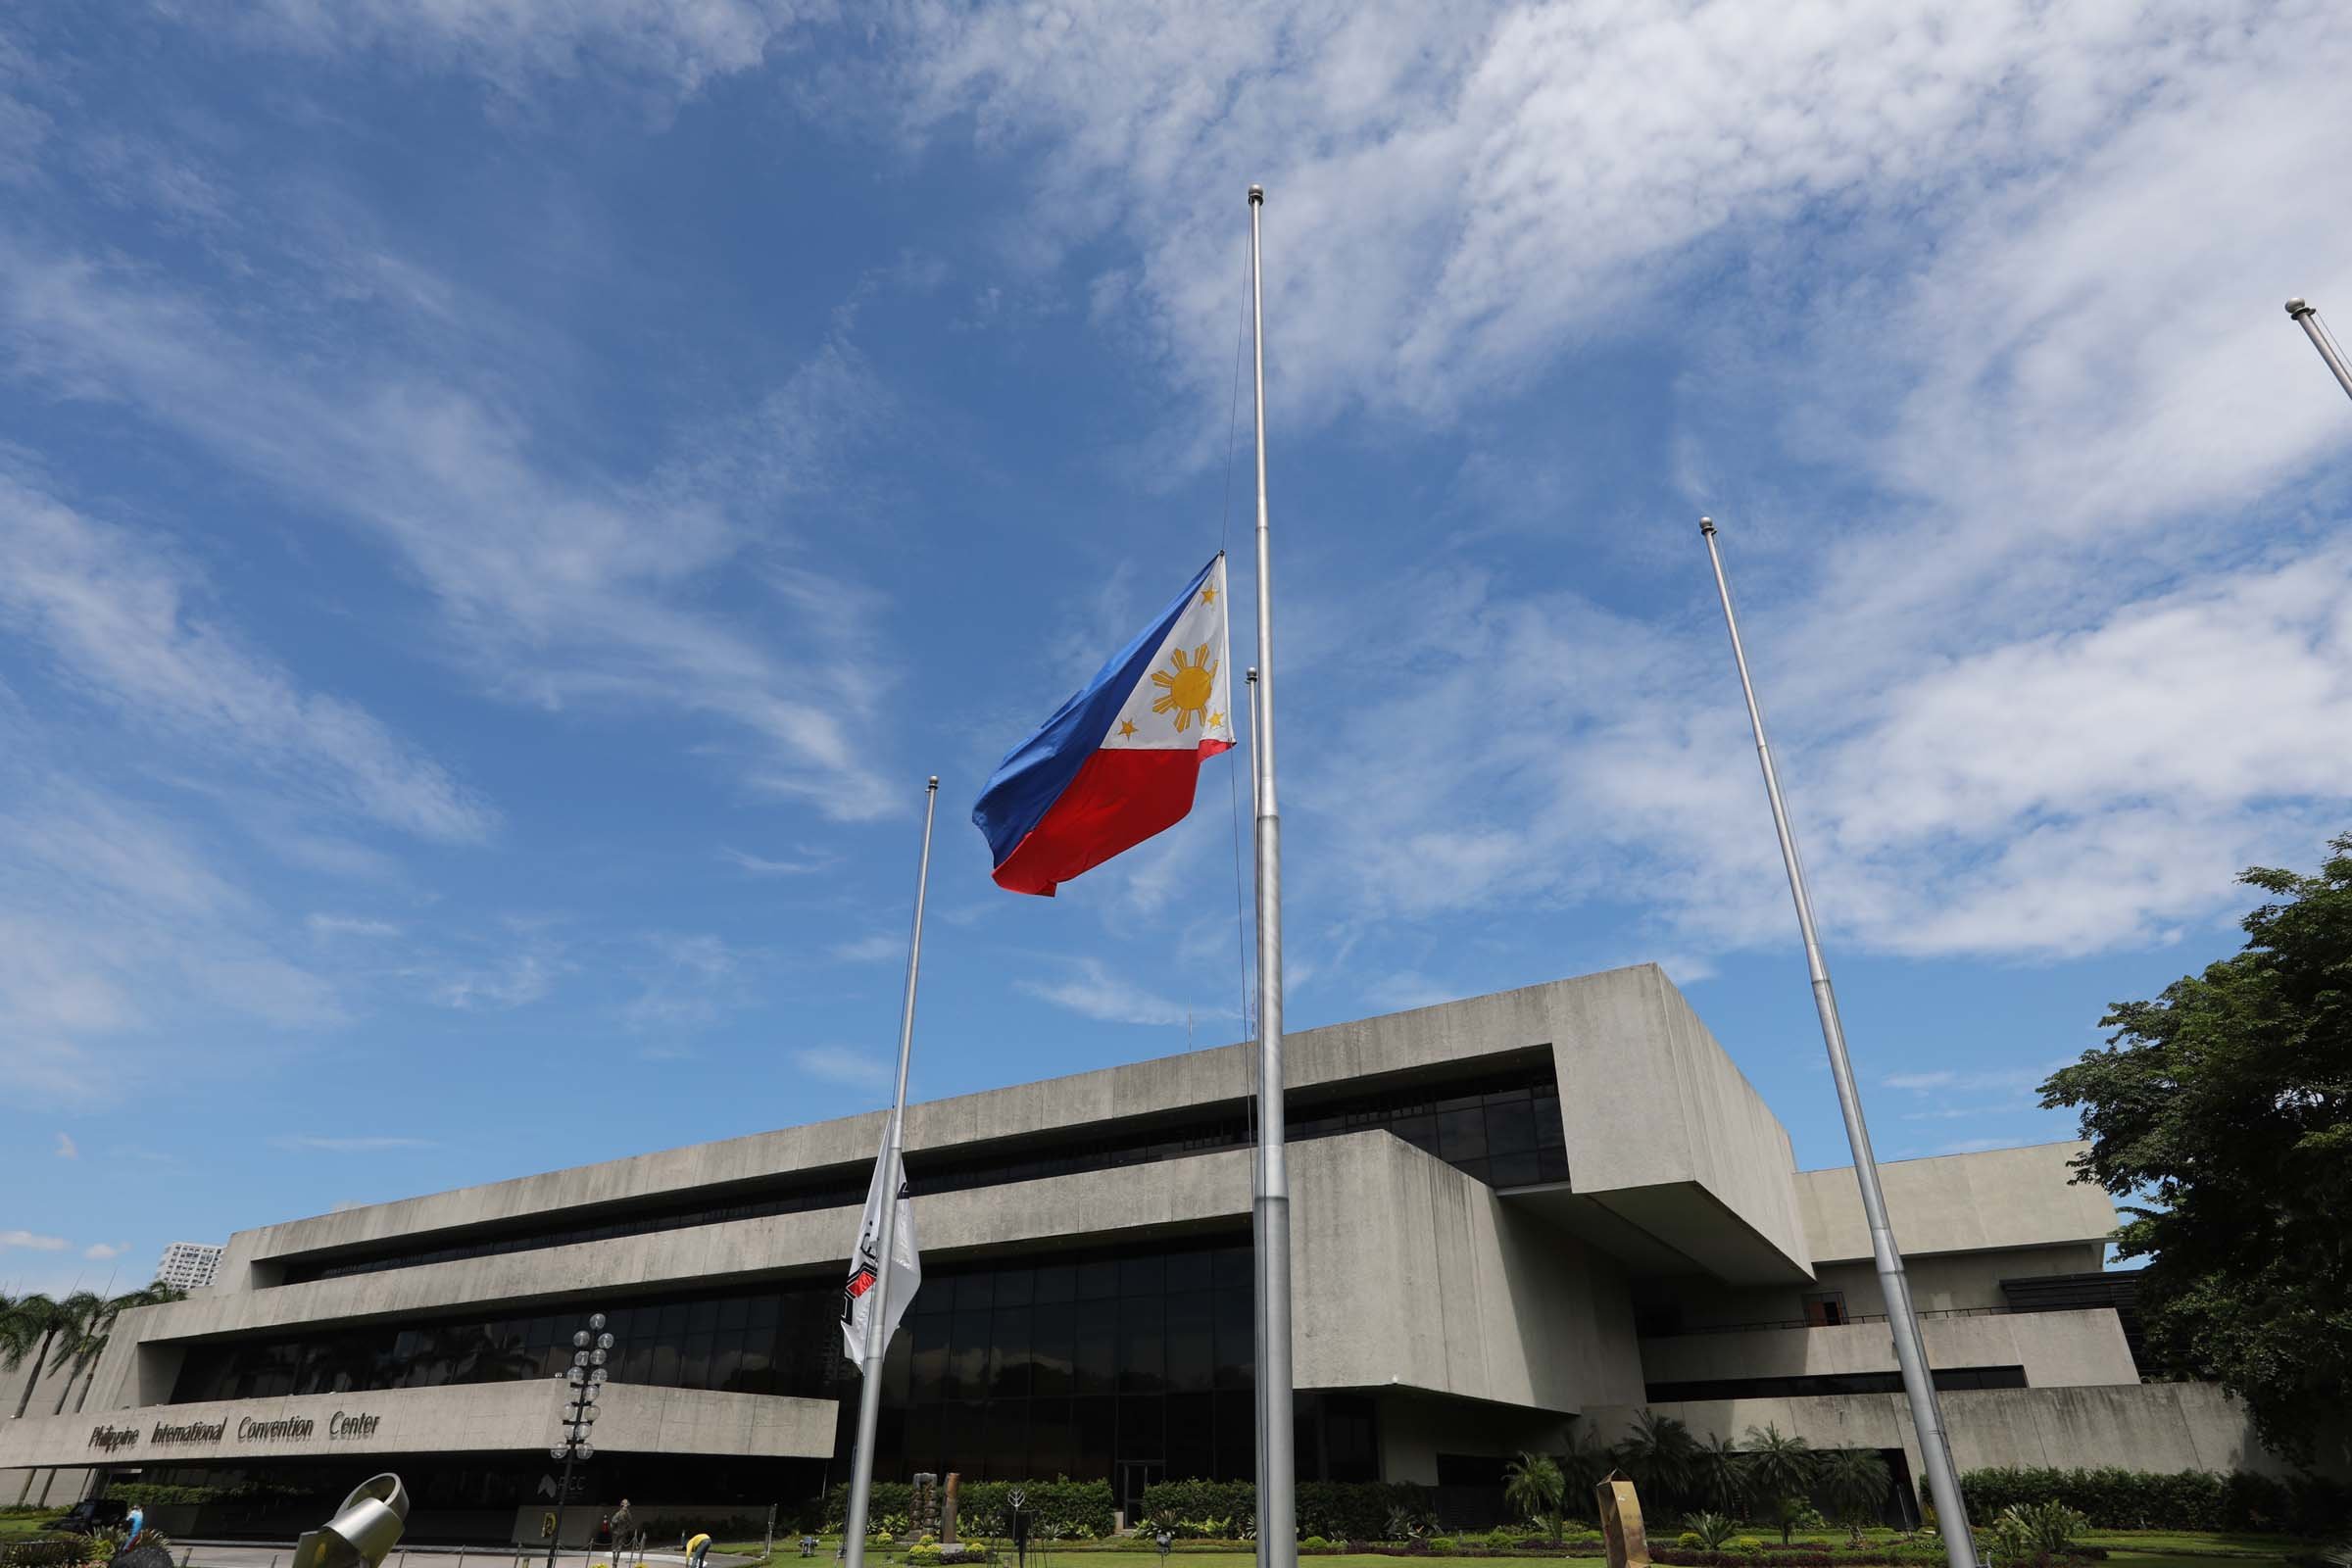 A TRIBUTE TO FALLEN HEROES. Government offices fly their flags at half-mast